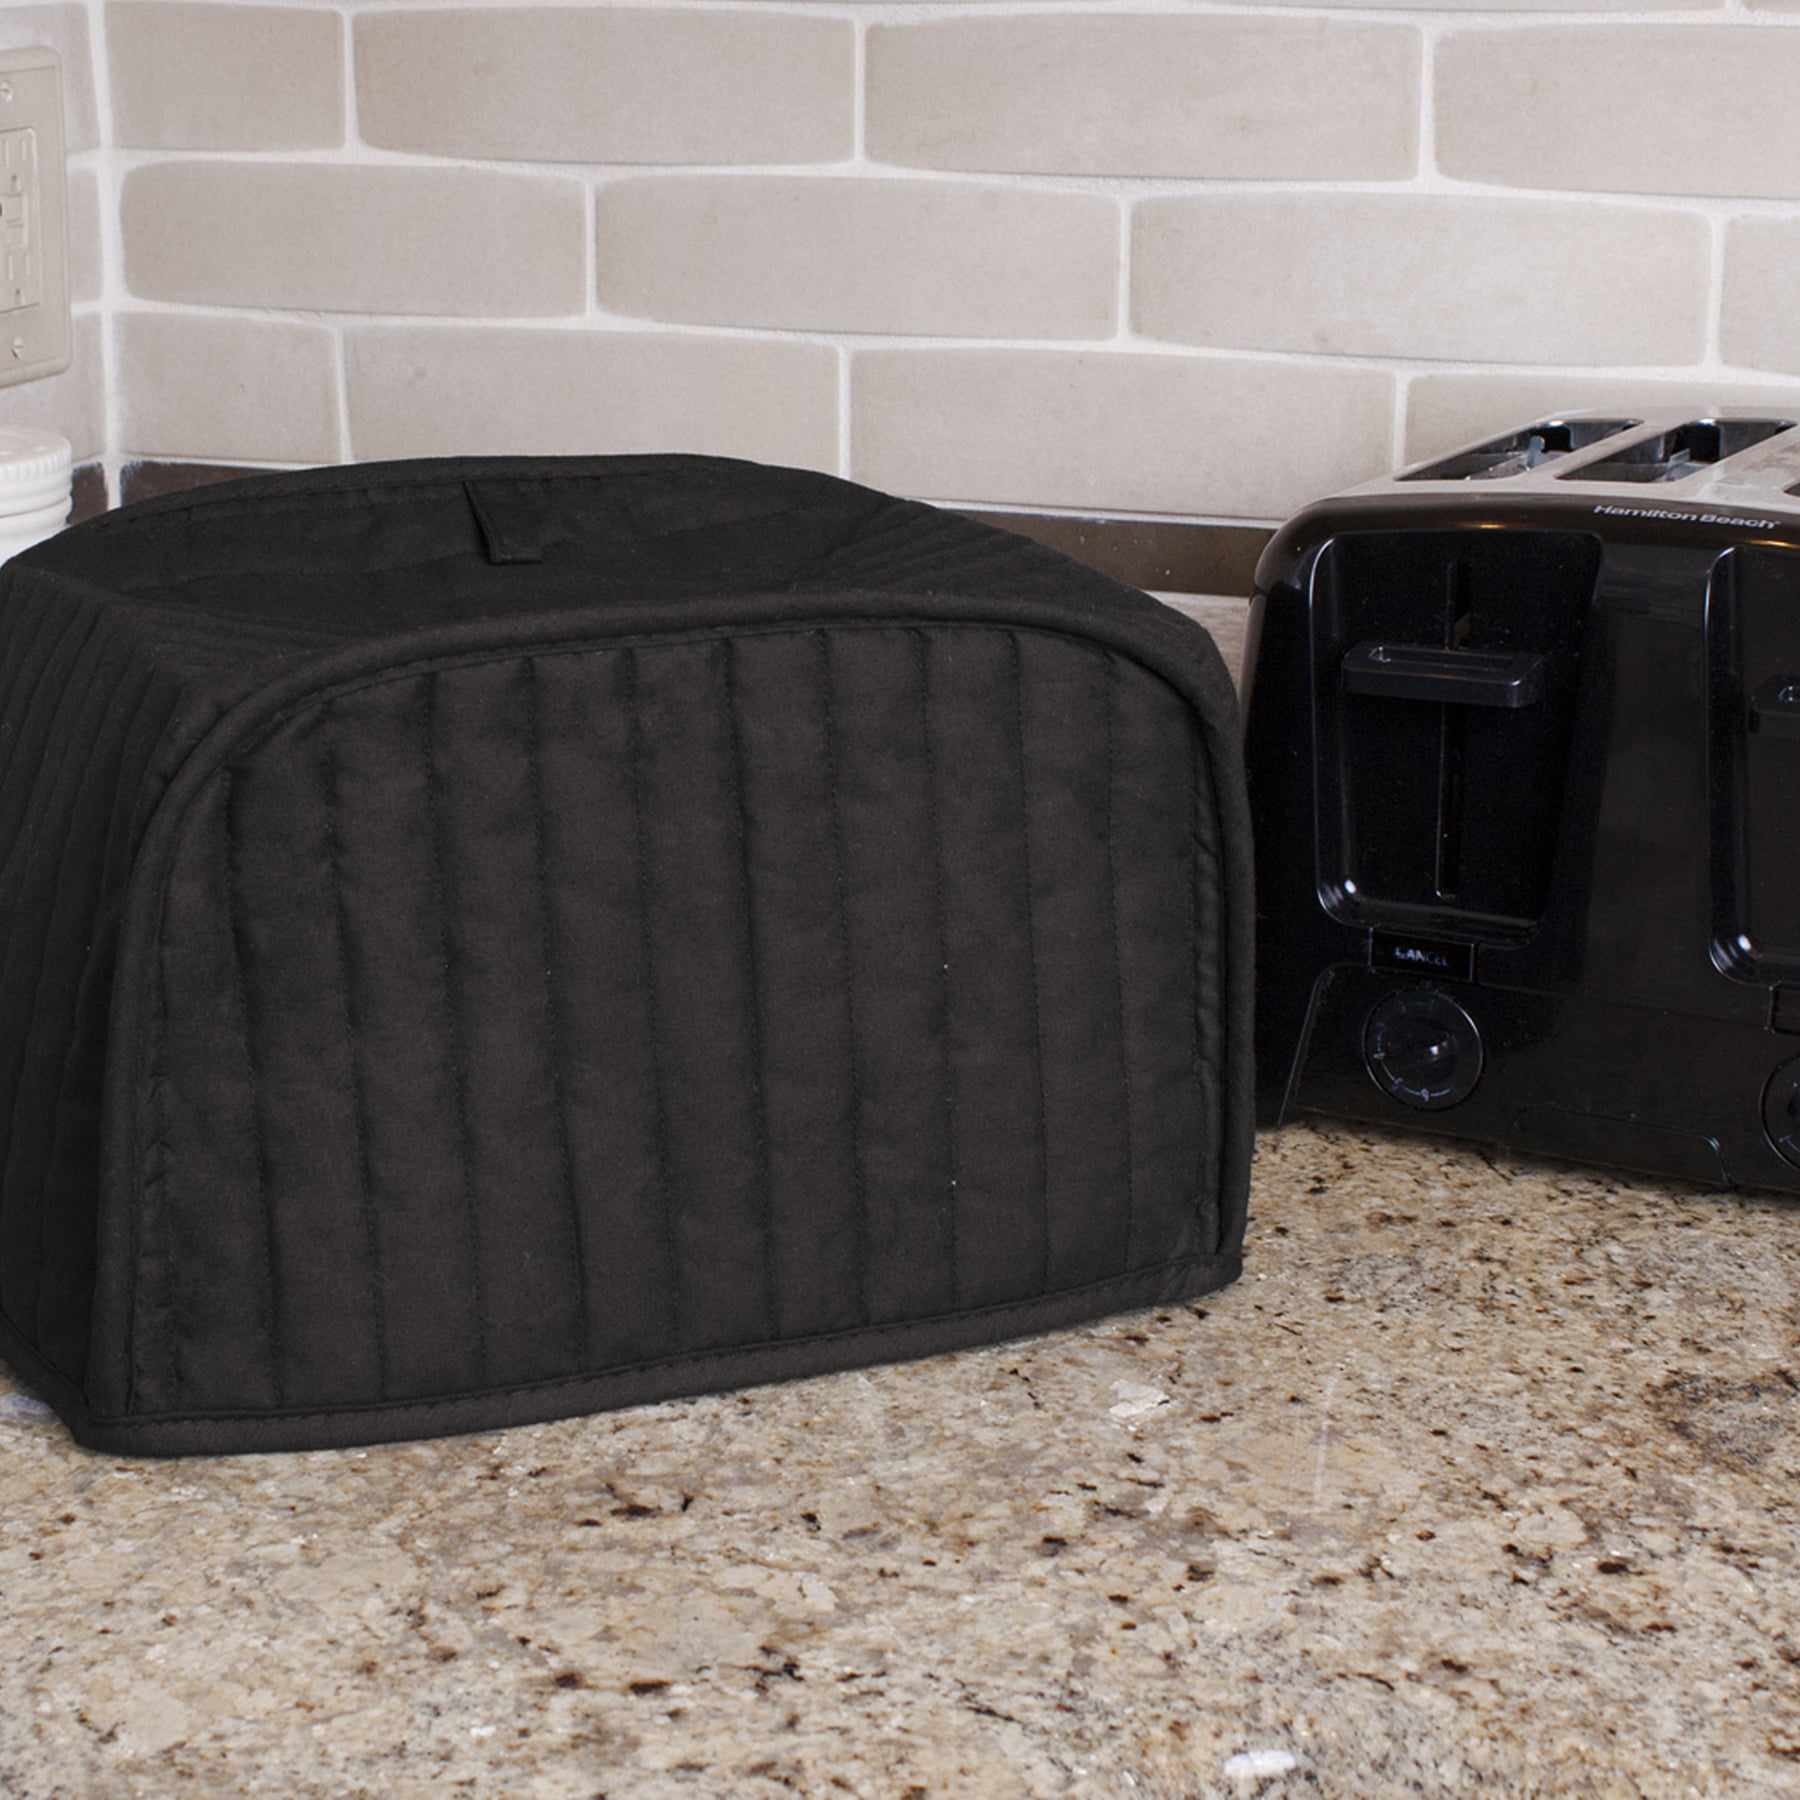 RITZ Polyester / Cotton Quilted Four Slice Toaster Appliance Cover Machine Washable Dust and Fingerprint Protection Graphite Grey 